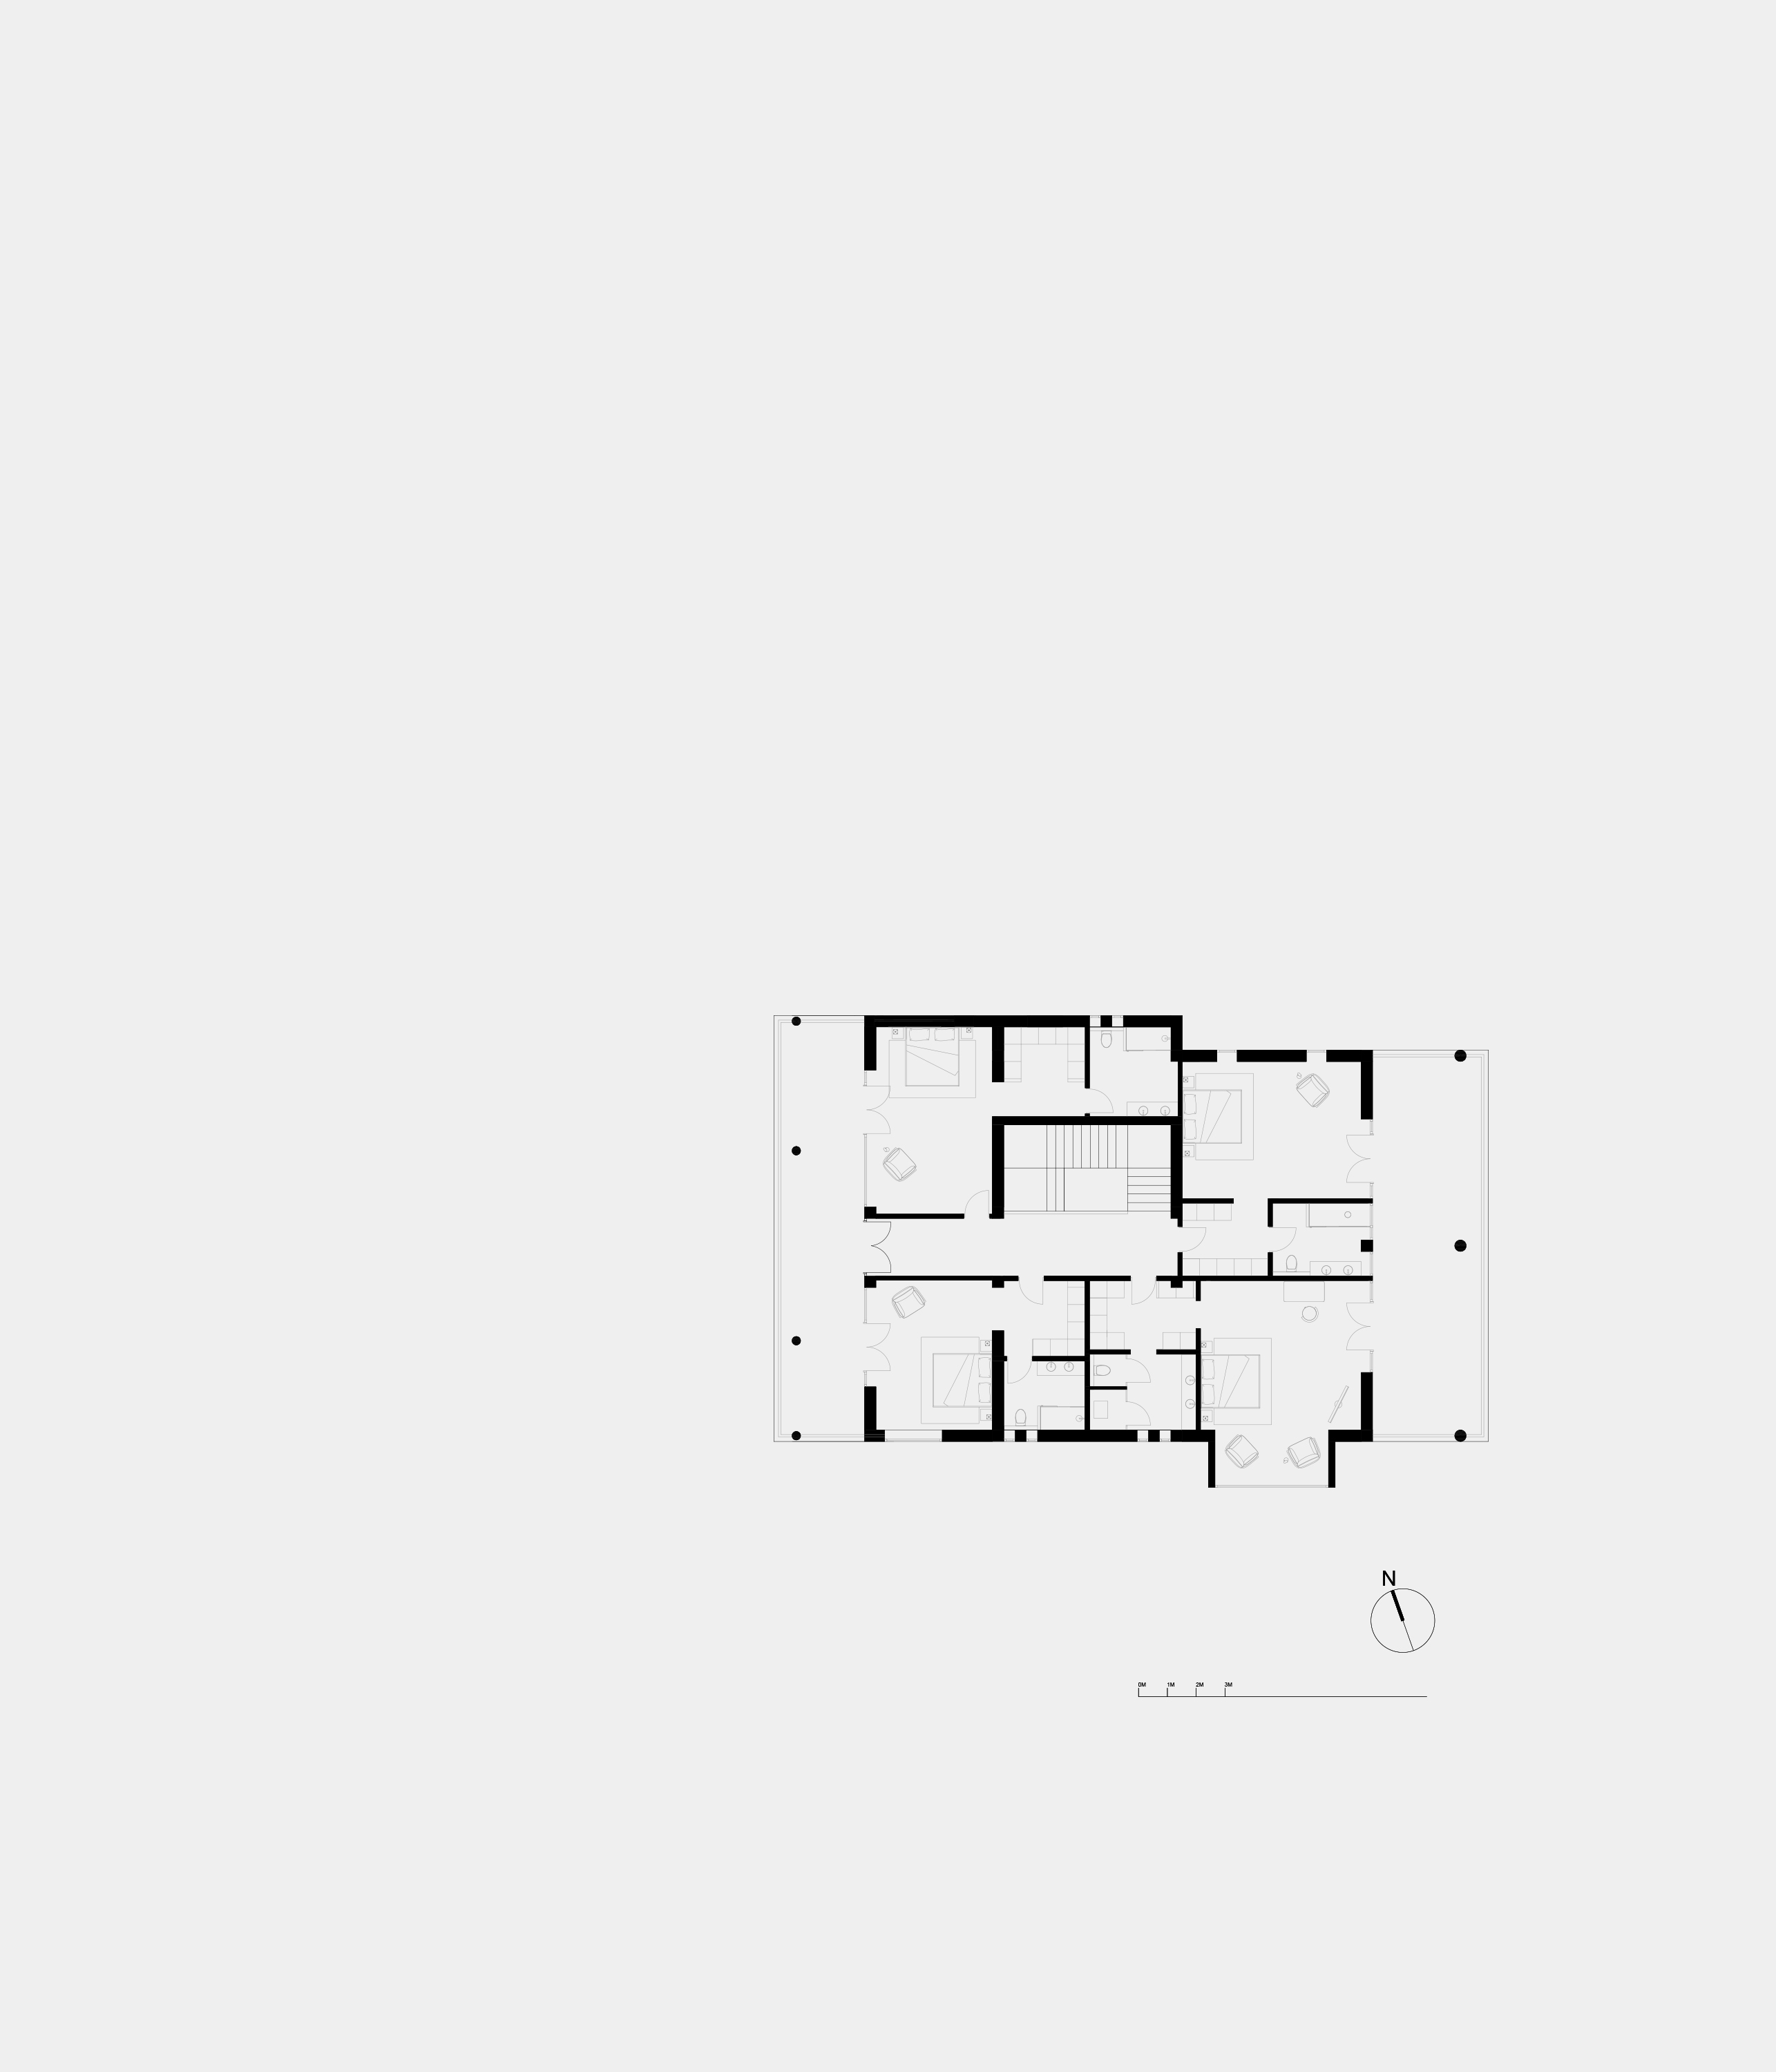 IA2152 - TOWN HOUSE - First Floor, Proposed General Arrangment